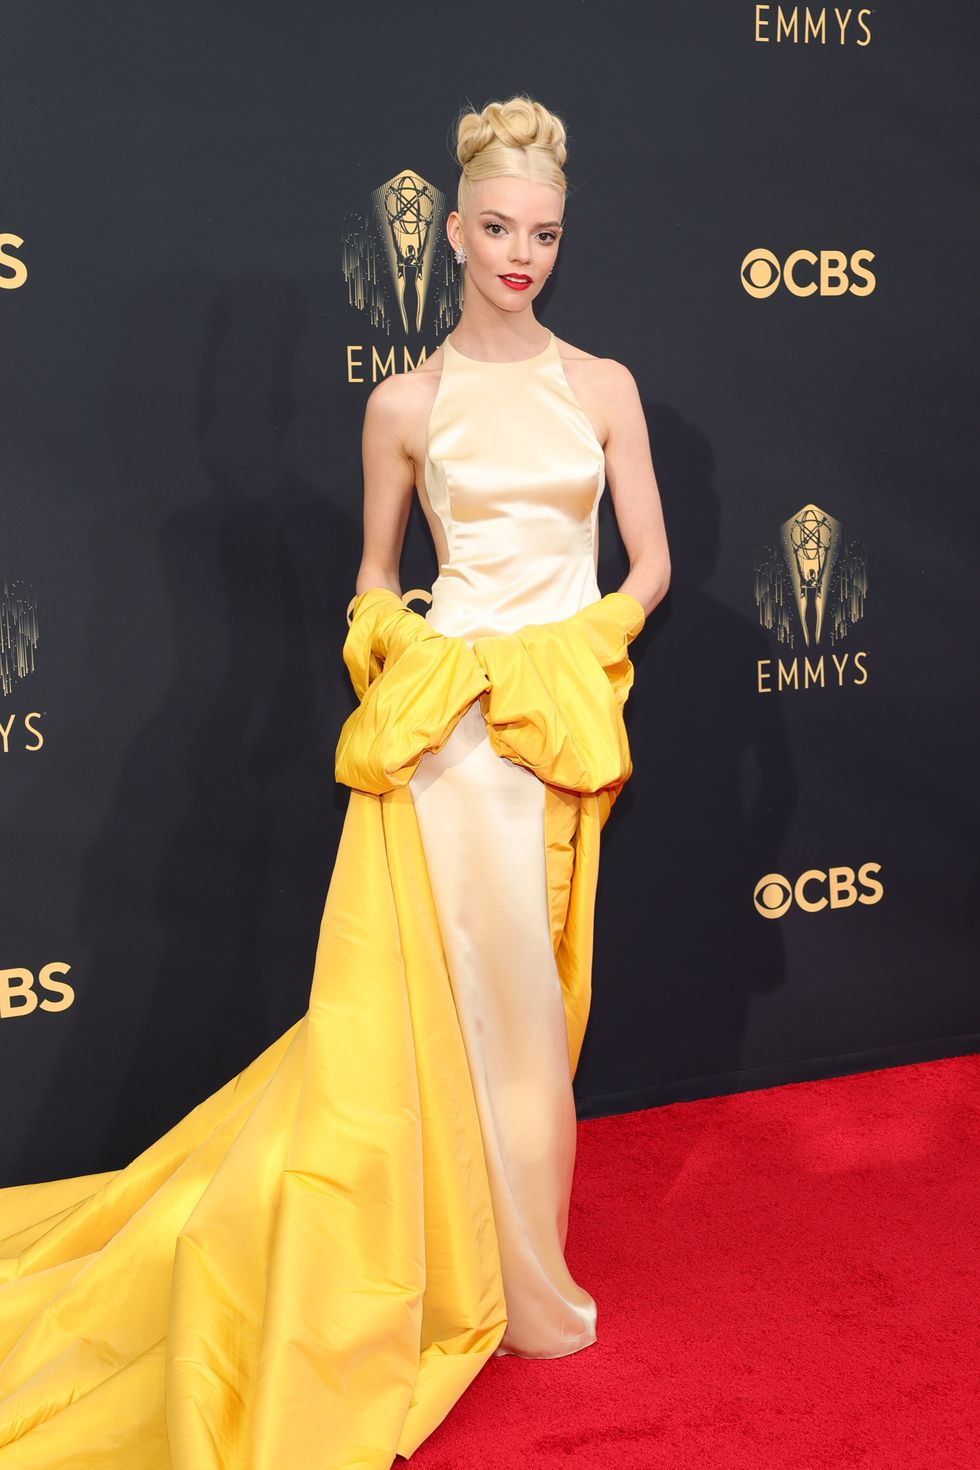 Anya TaylorJoy Wears Dior Haute Couture Dress to 2021 Emmy Awards